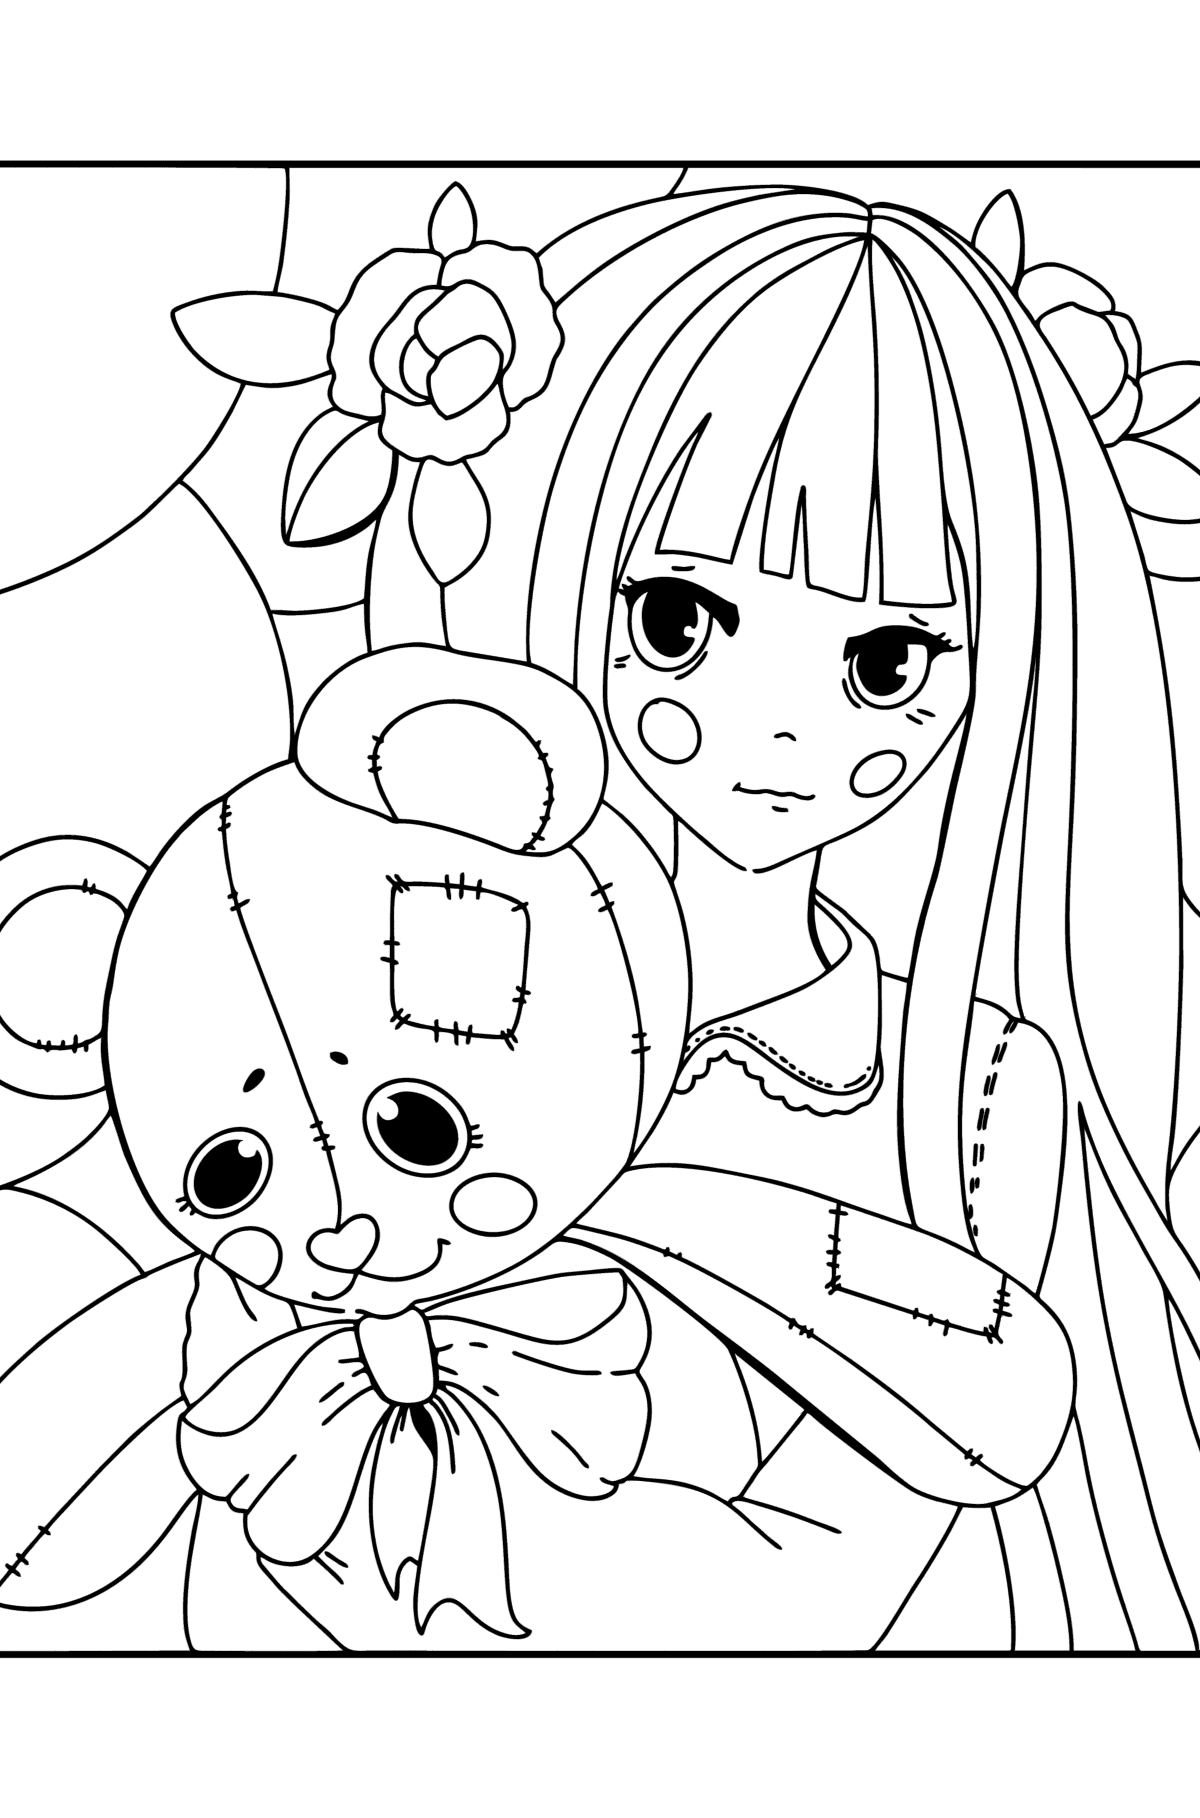 Anime girl coloring page holding a teddy - Coloring Pages for Kids